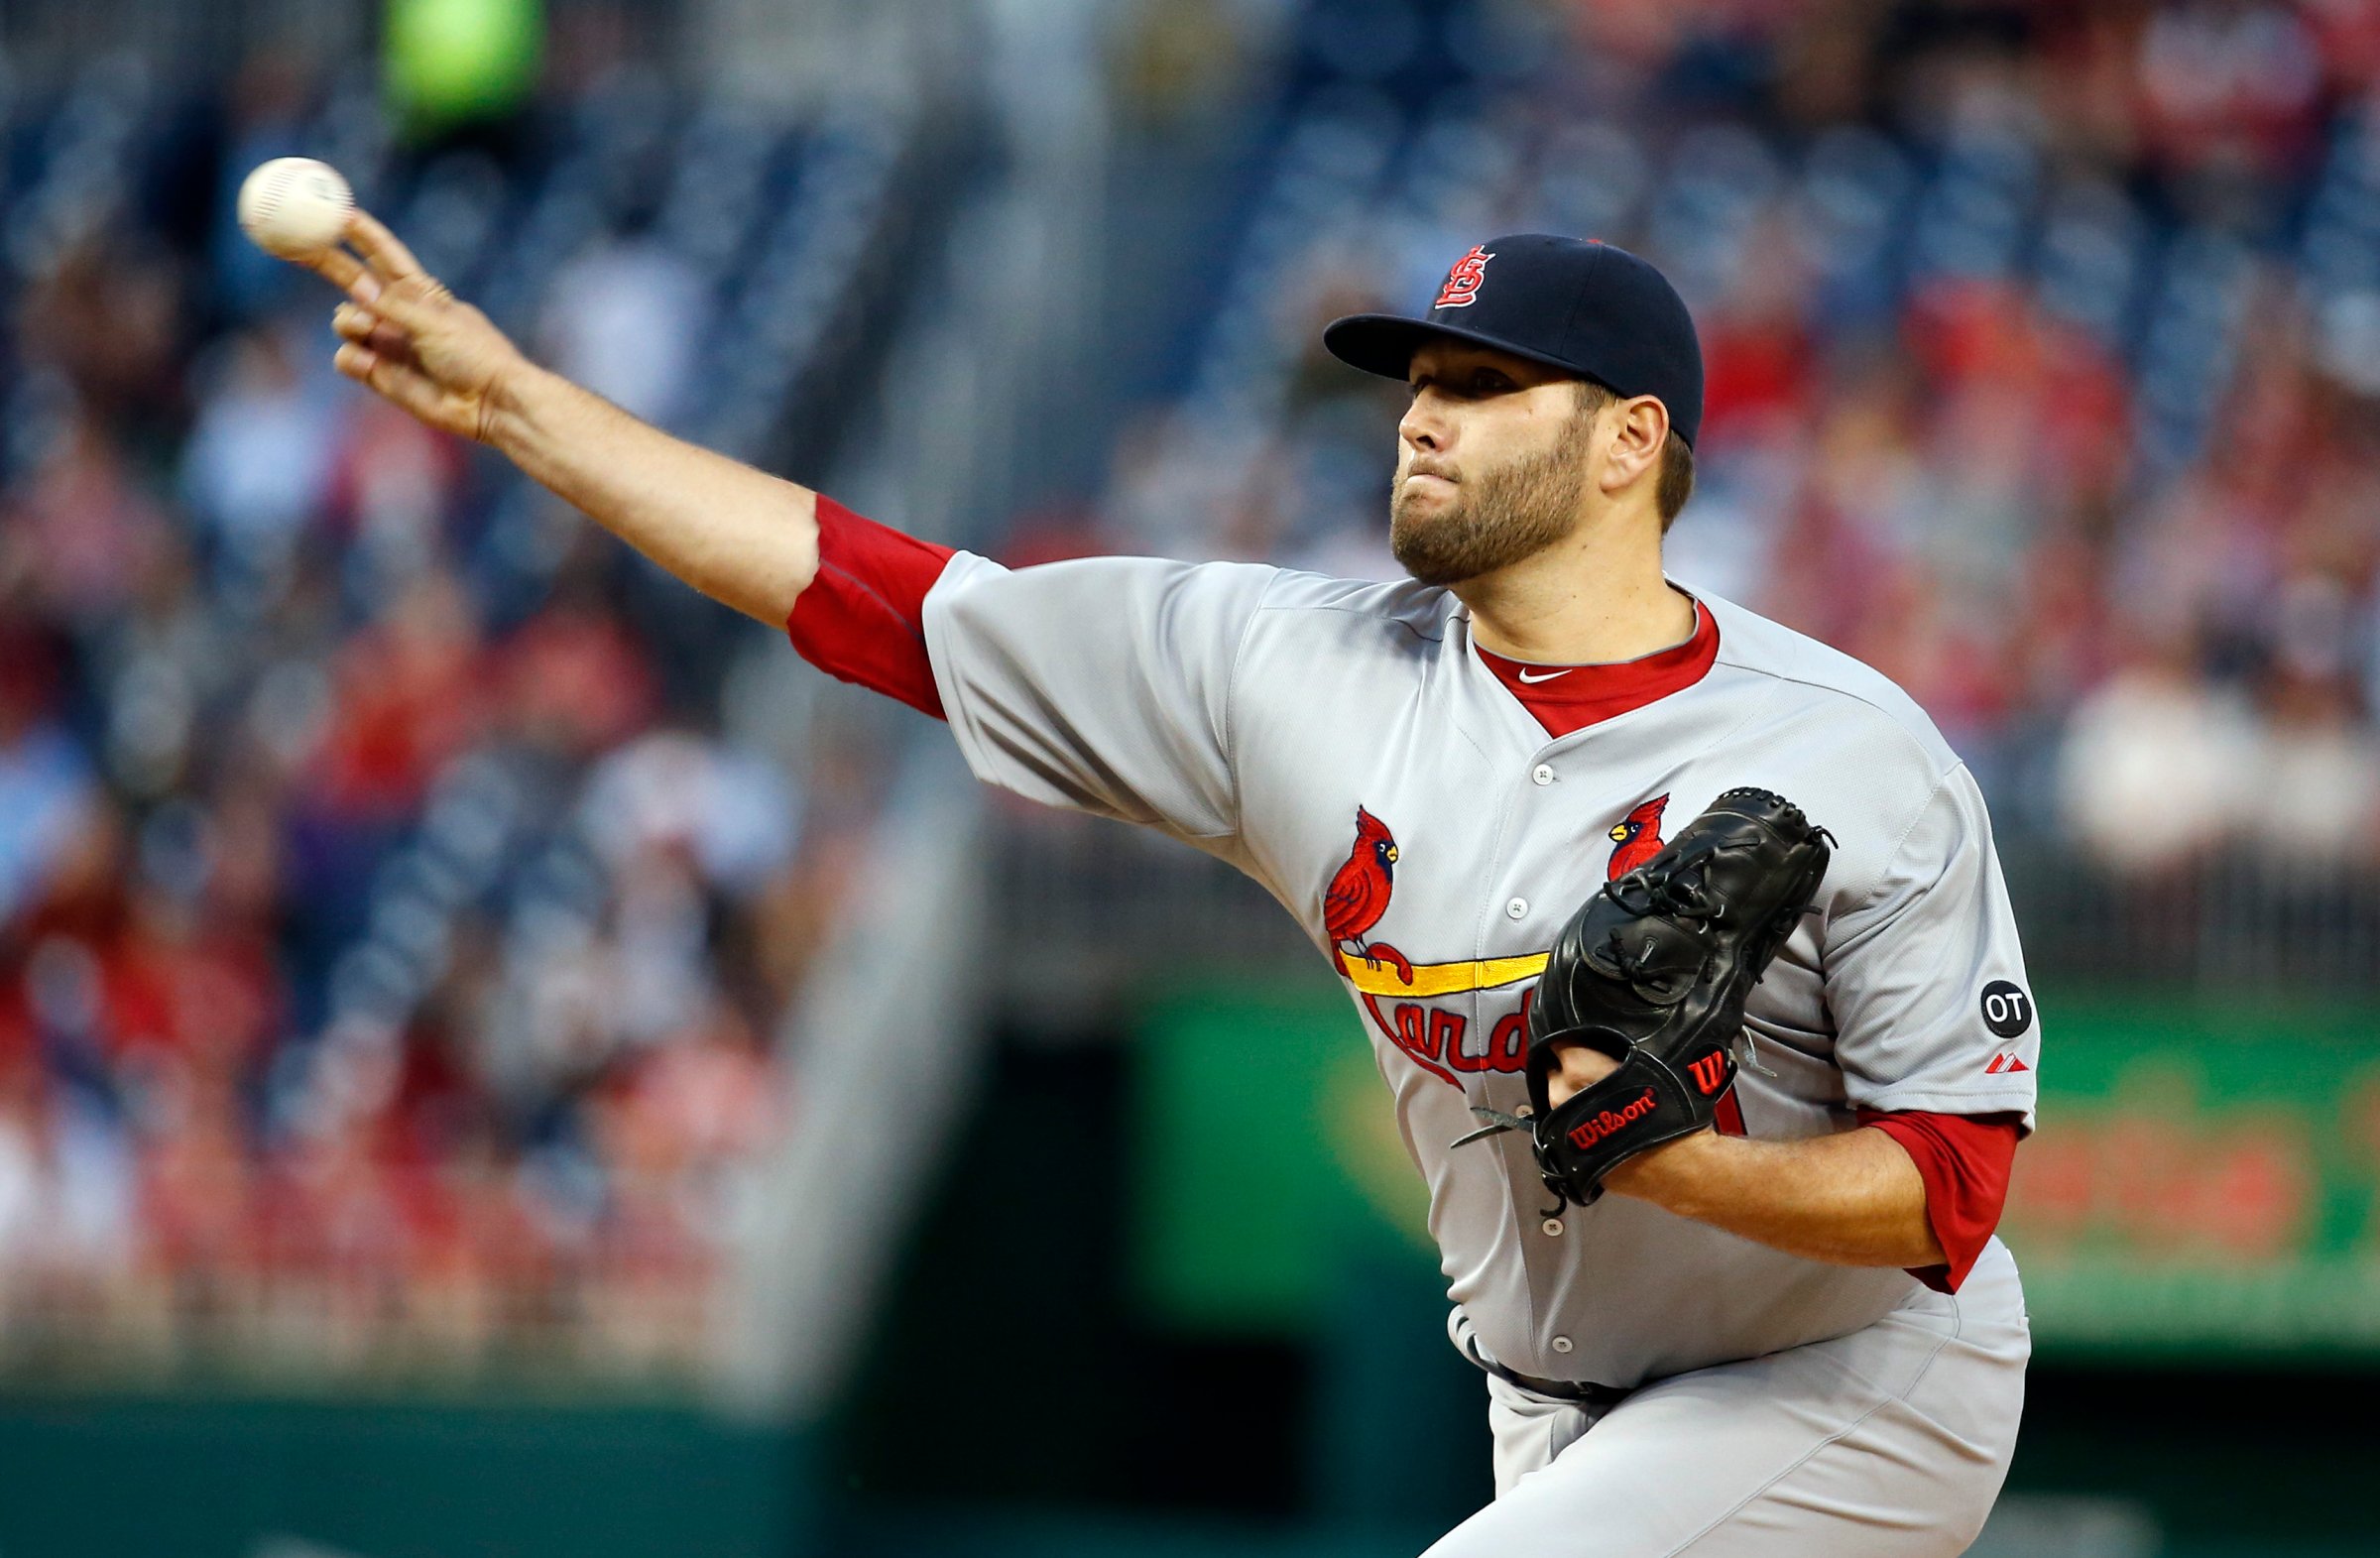 St. Louis Cardinals pitcher Lance Lynn during a game against the Washington Nationals in Washington on April 21, 2015.